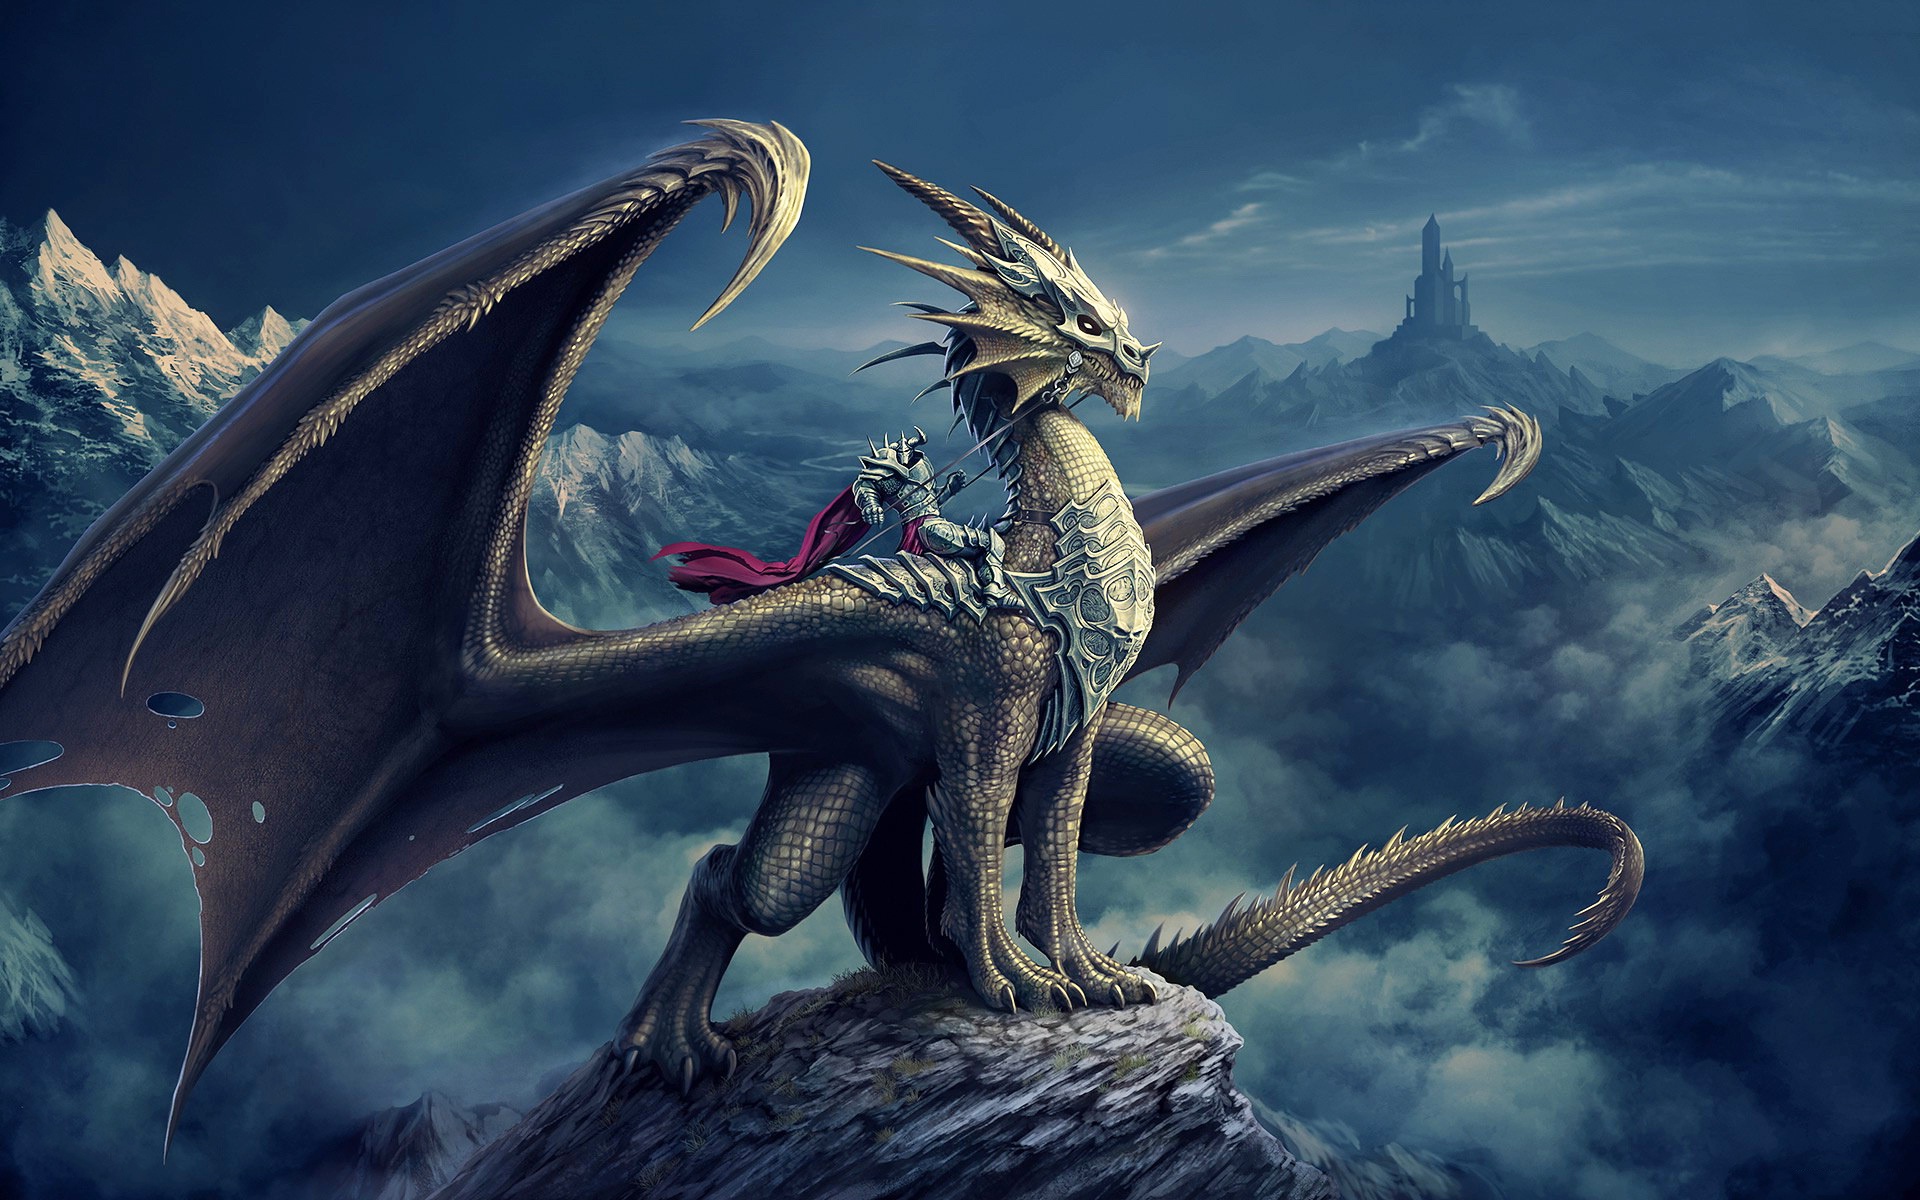 Free Download Dragon Hd Wallpapers Dragon Pictures Cool Wallpapers 19x10 For Your Desktop Mobile Tablet Explore 73 Dragon Pictures Wallpapers 3d Dragon Wallpaper Free Free Dragon Art Wallpaper Free